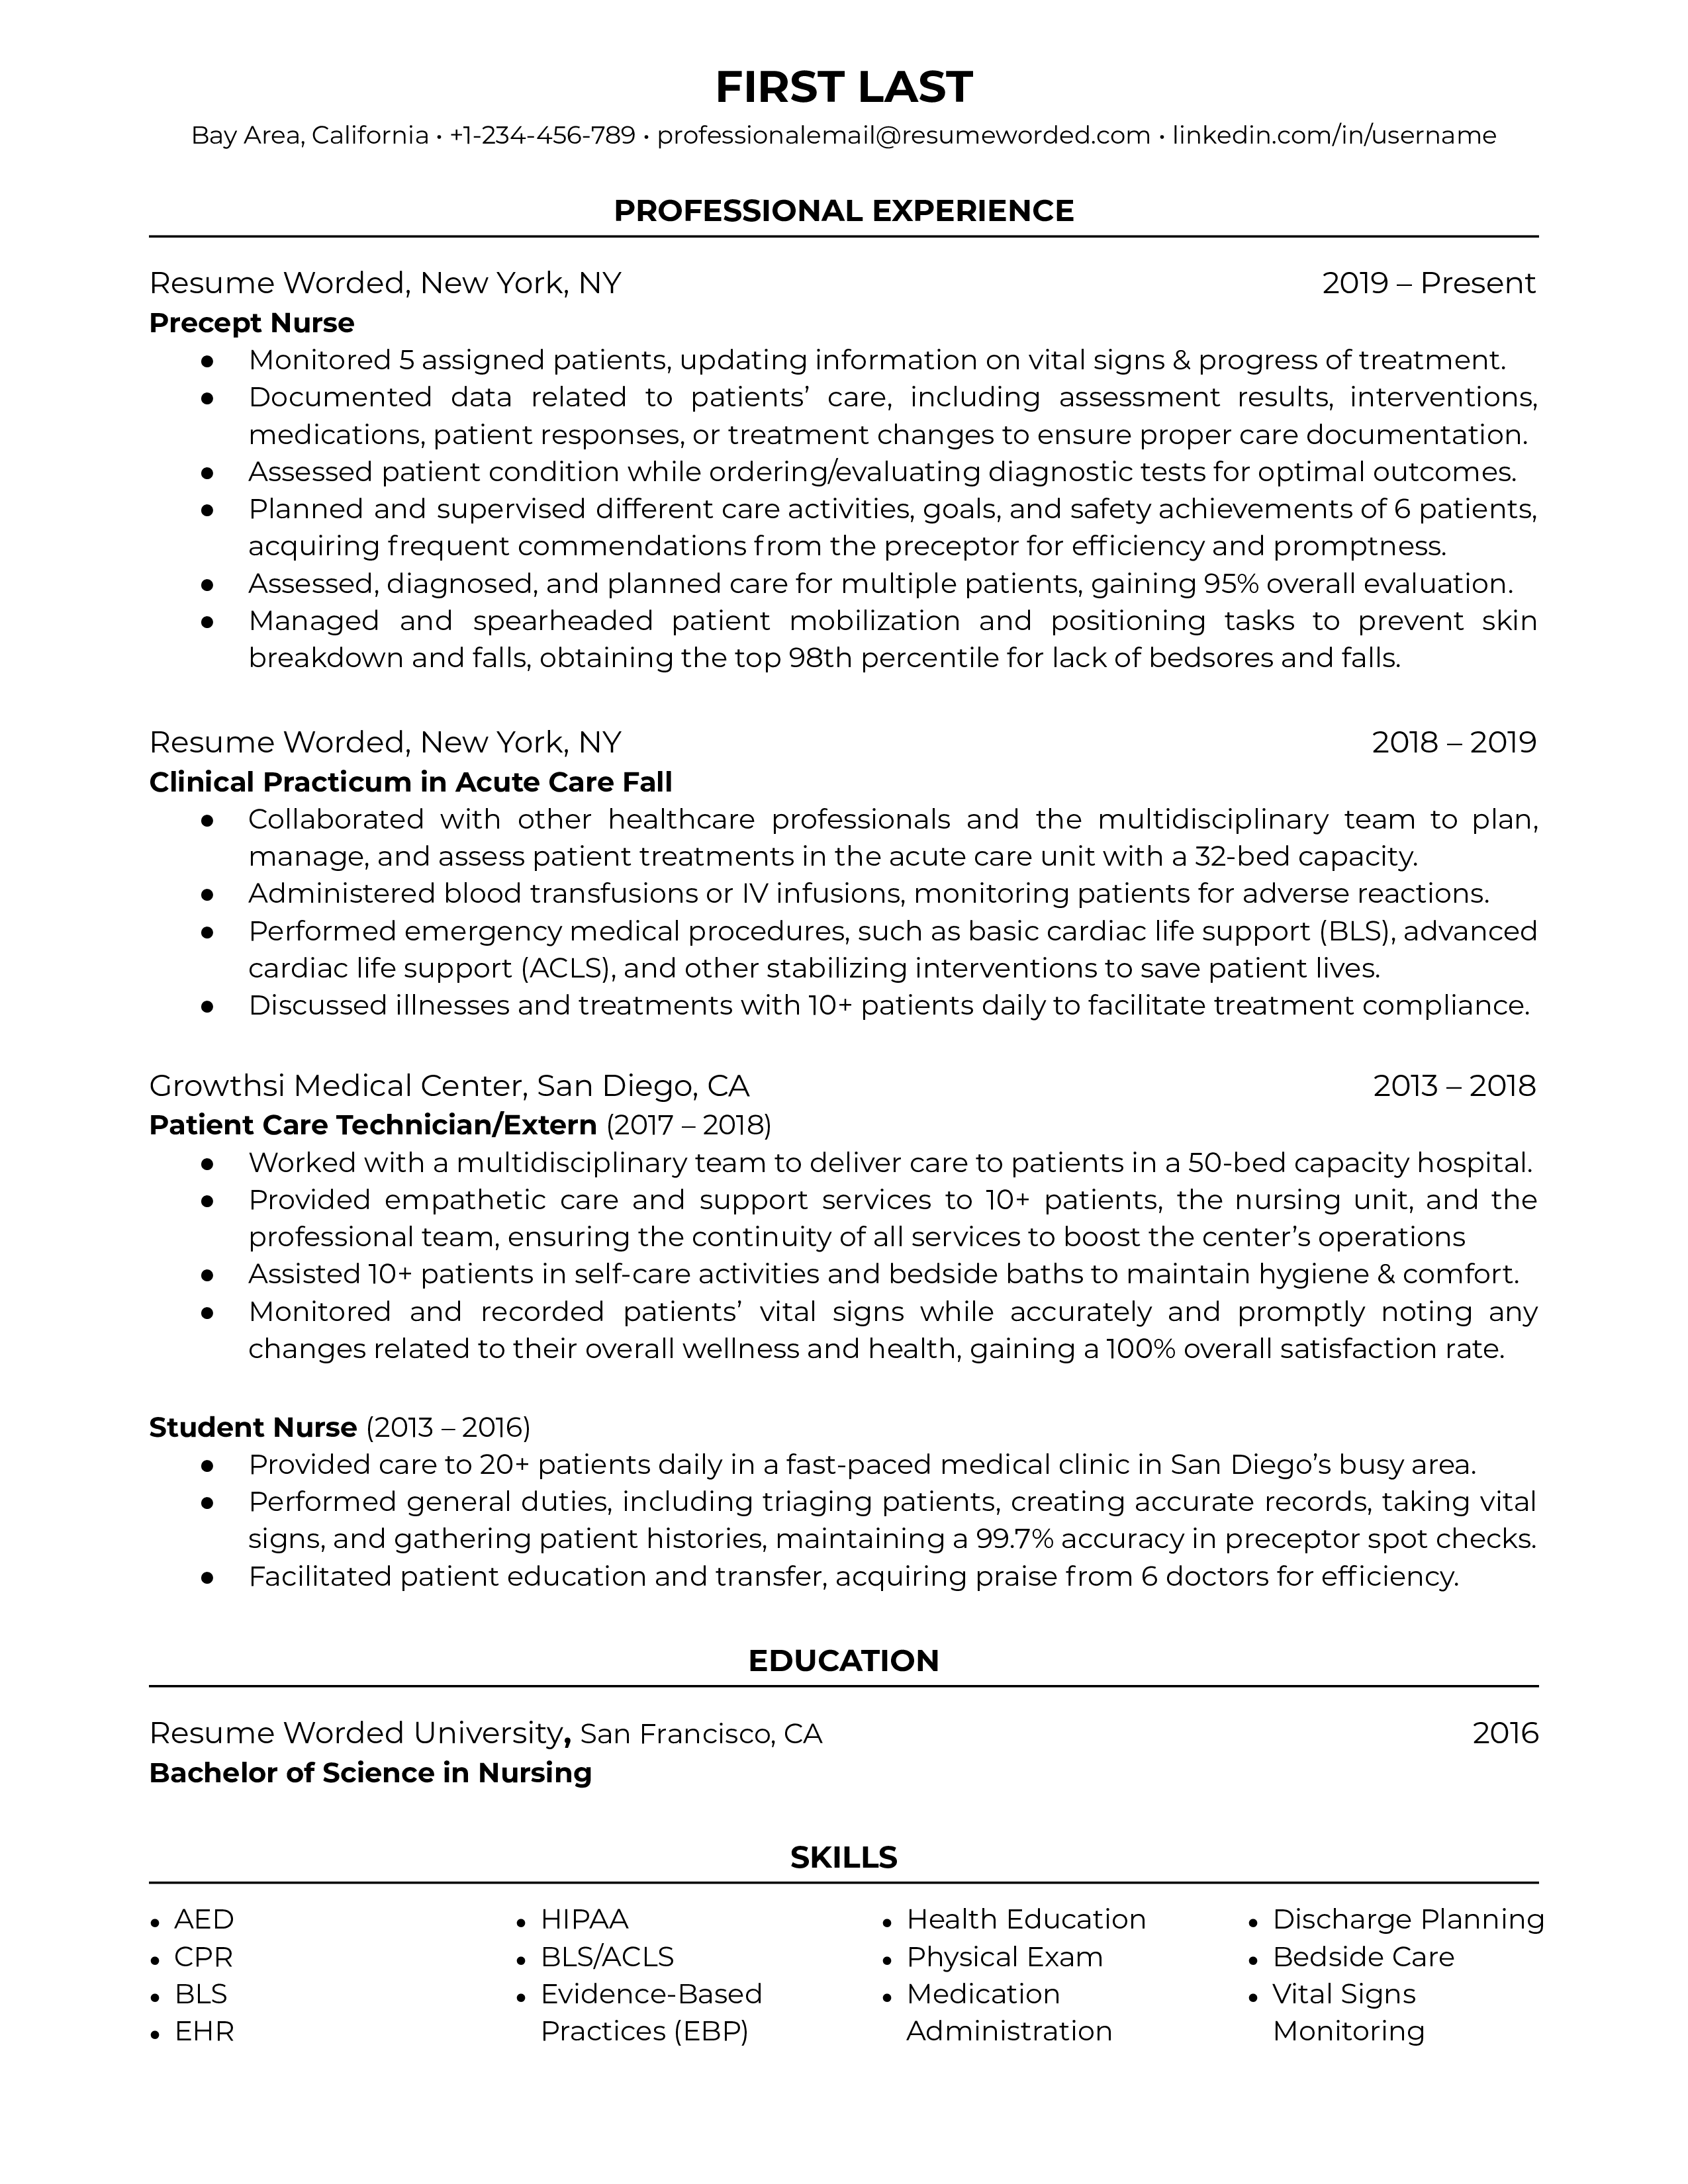 New grad nurse resume with clinical experience and soft skills highlighted